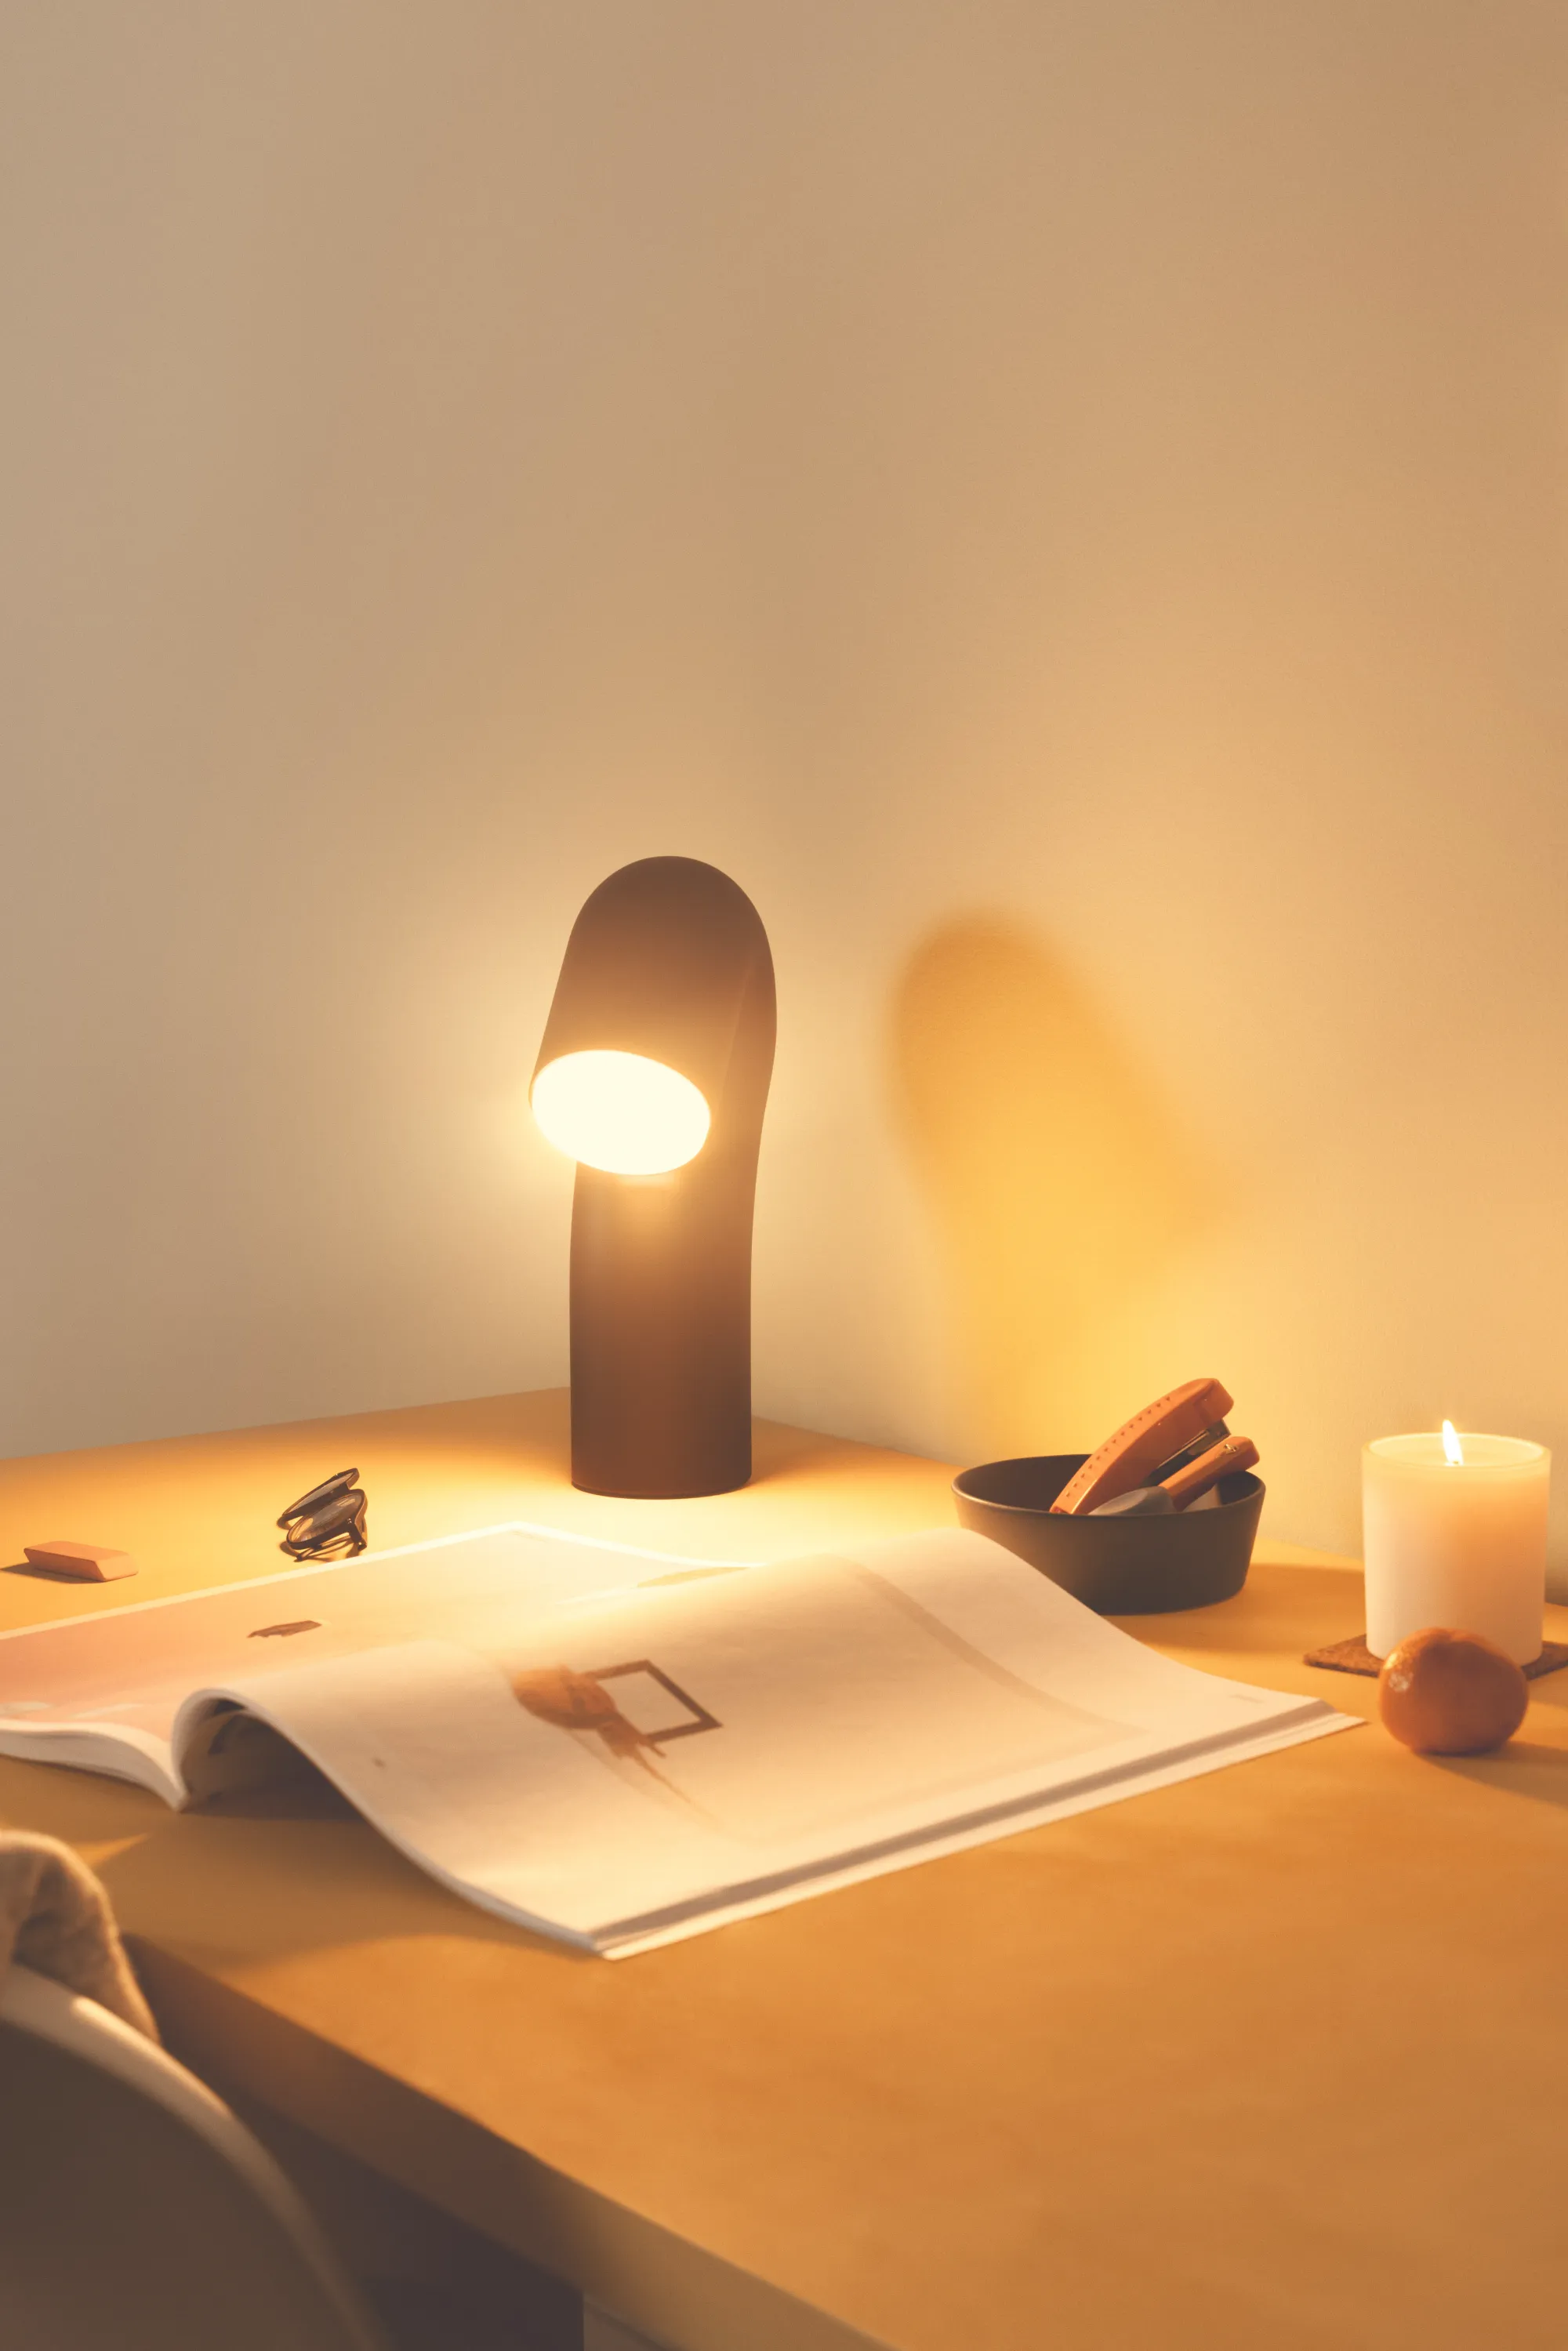 Ambient, accent, or task? The 3 different types of lighting explained